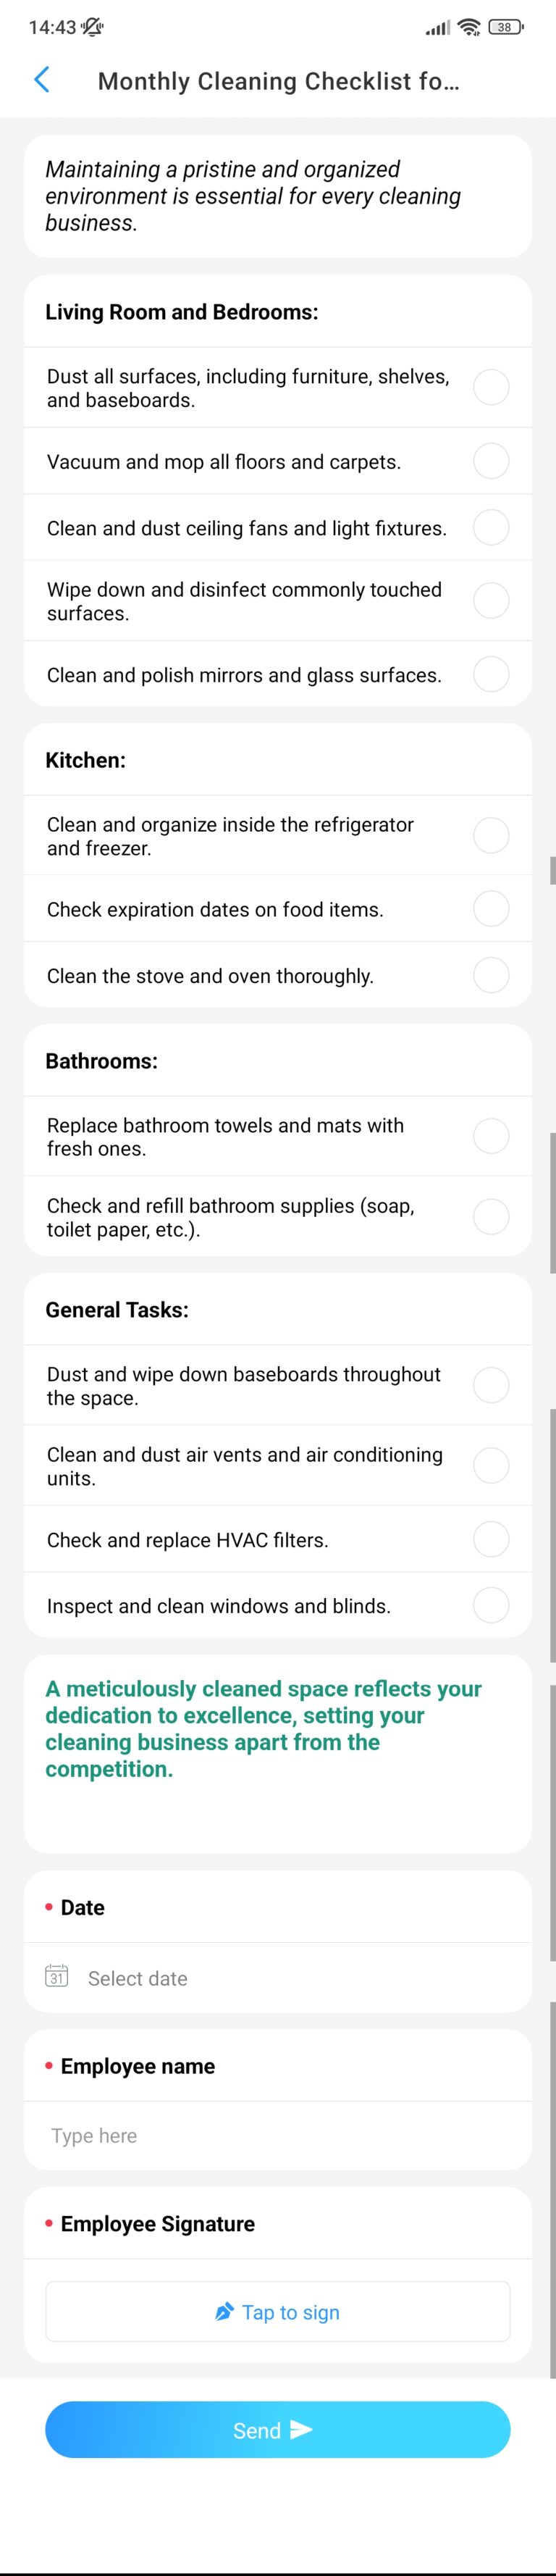 Monthly Cleaning Checklist for Cleaning Businesses screenshot